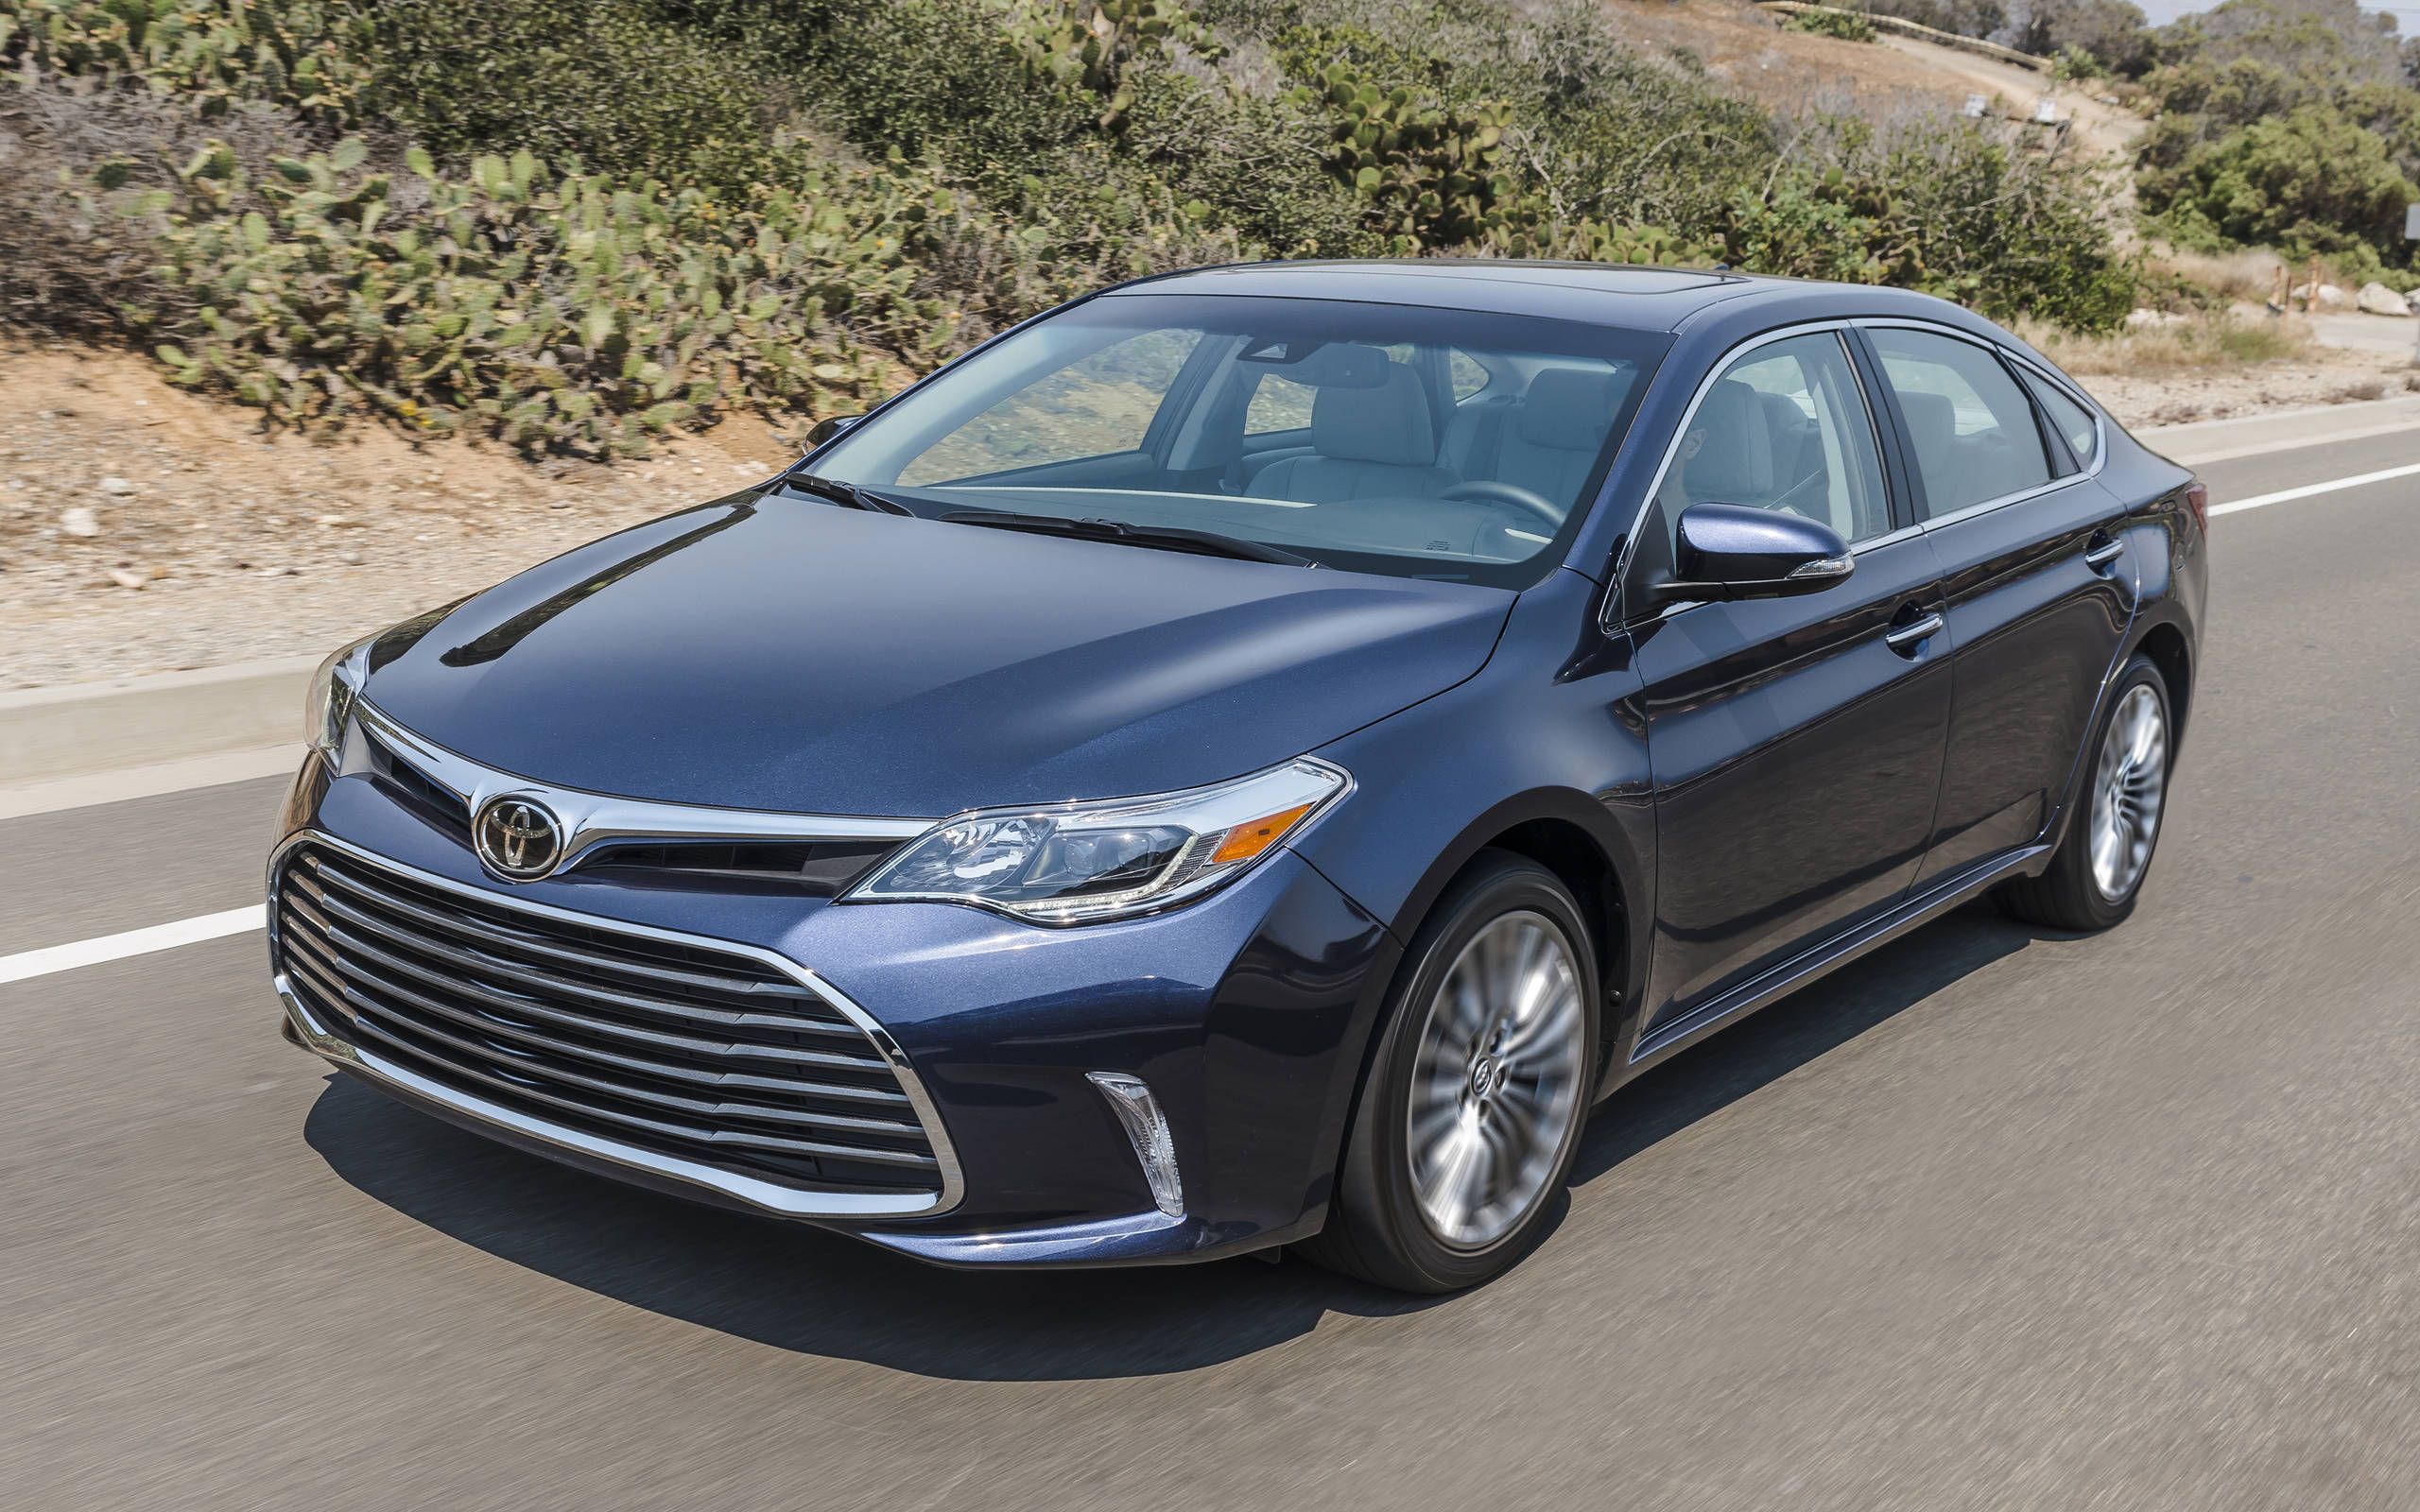 2017 Toyota Avalon XLE review: One of the last cushy cruisers